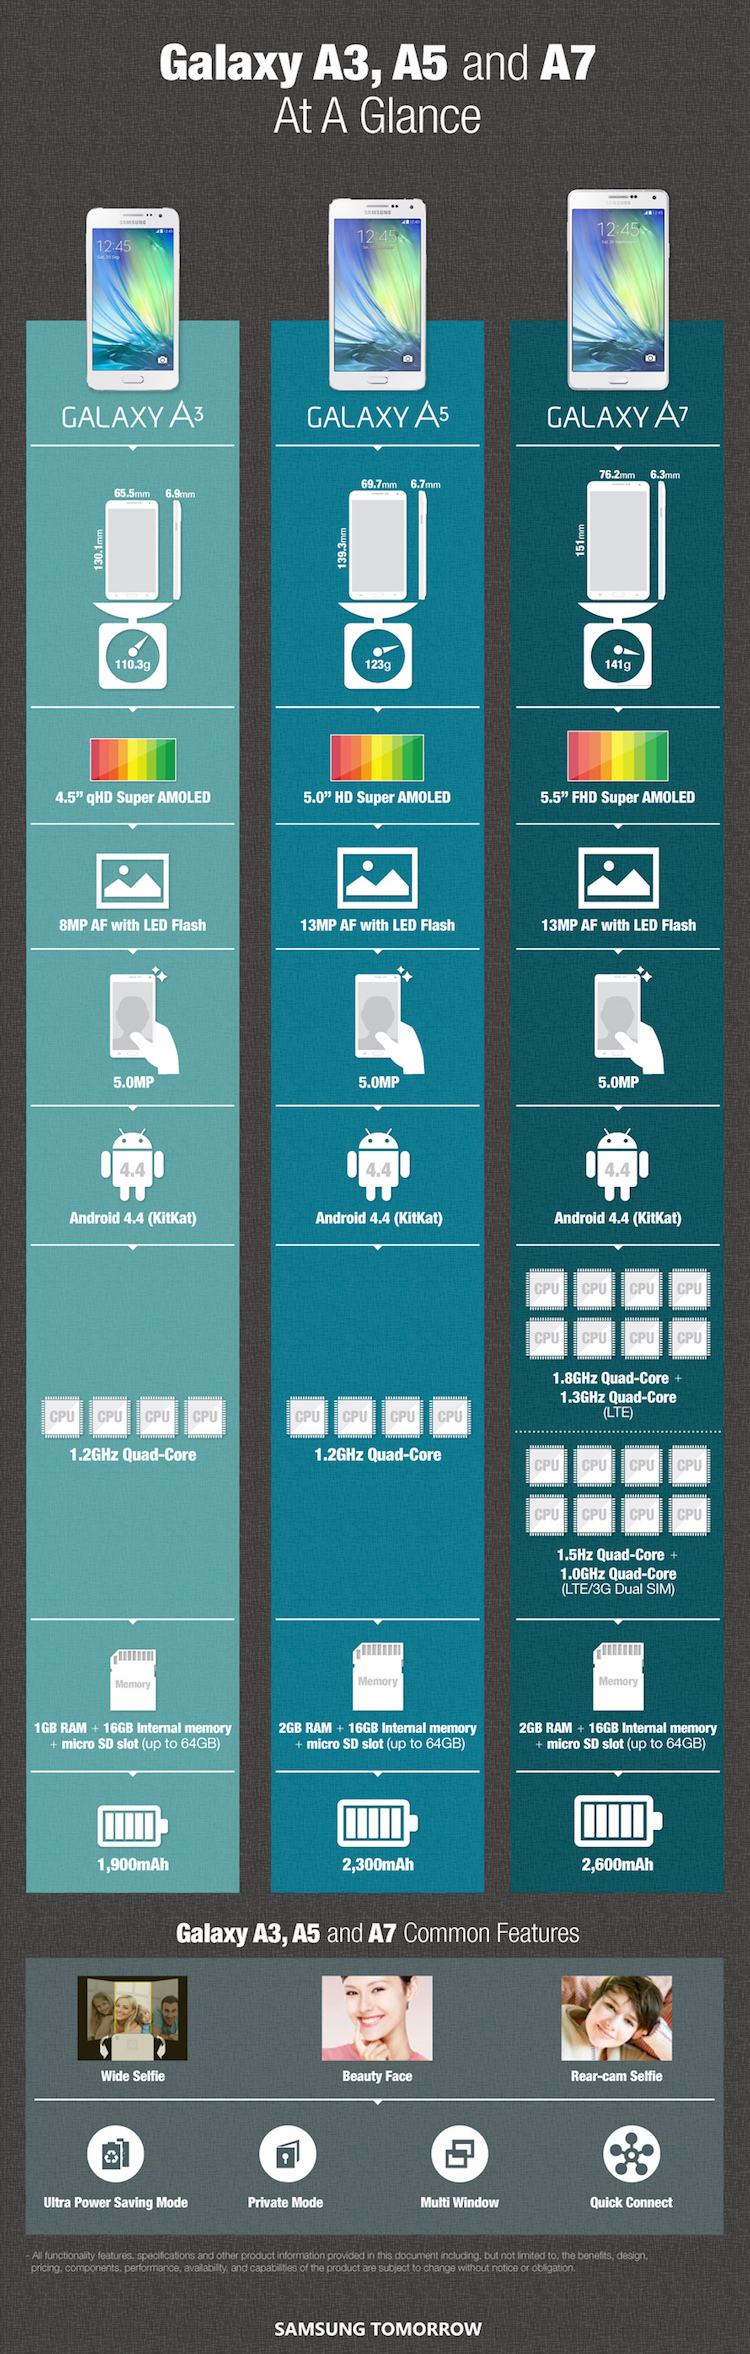 Infographic-Galaxy-A3-A5-and-A7-At-A-Glance2